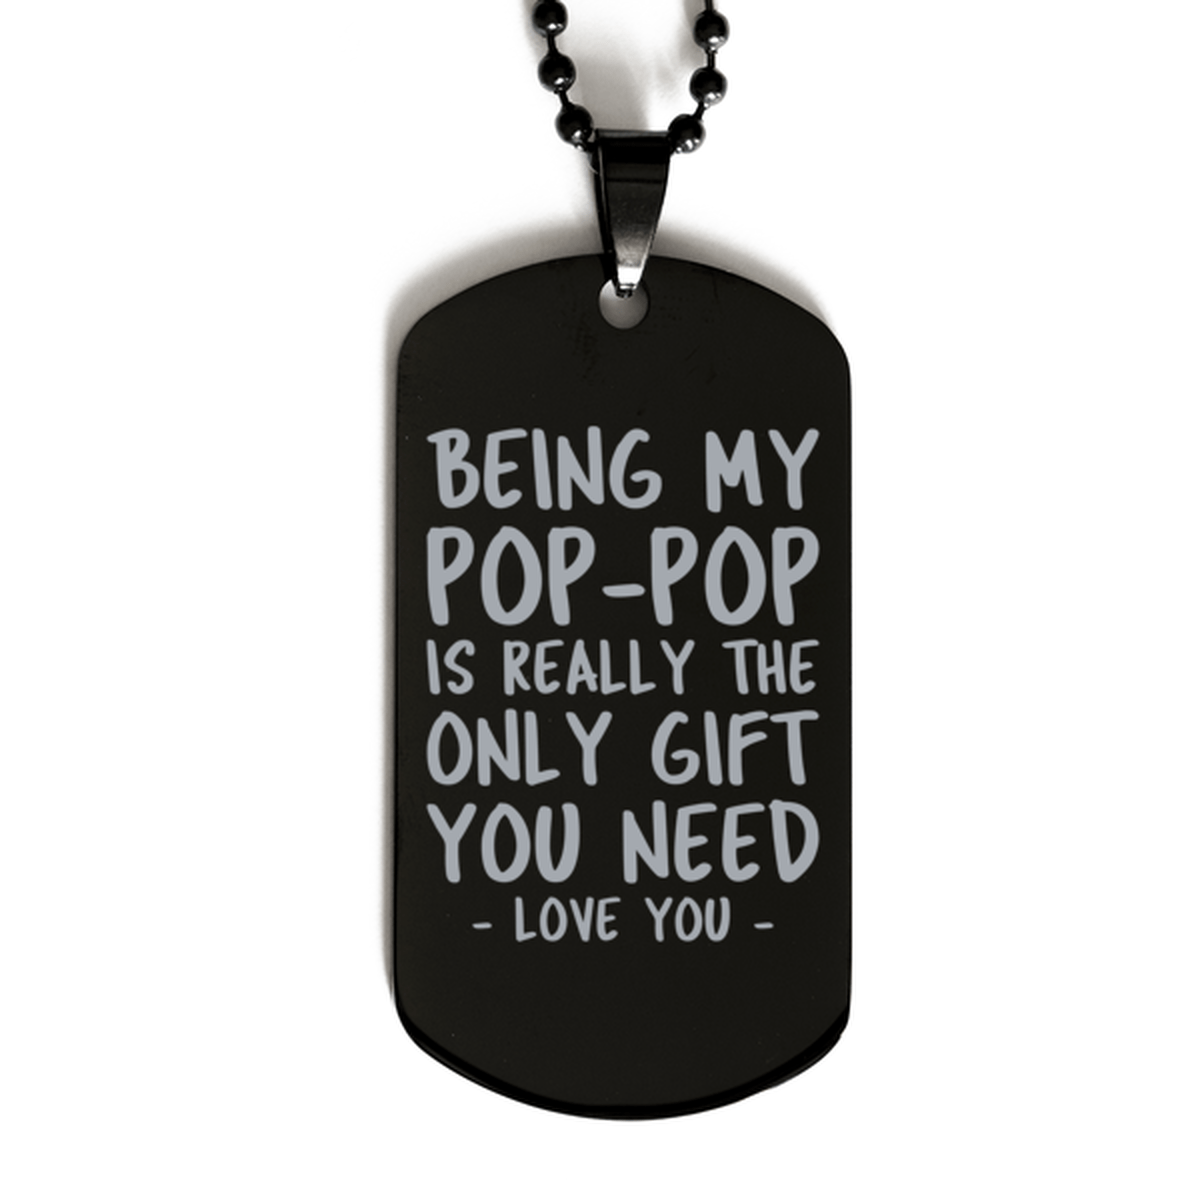 Funny Pop-pop Black Dog Tag Necklace, Being My Pop-pop Is Really the Only Gift You Need, Best Birthday Gifts for Pop-pop